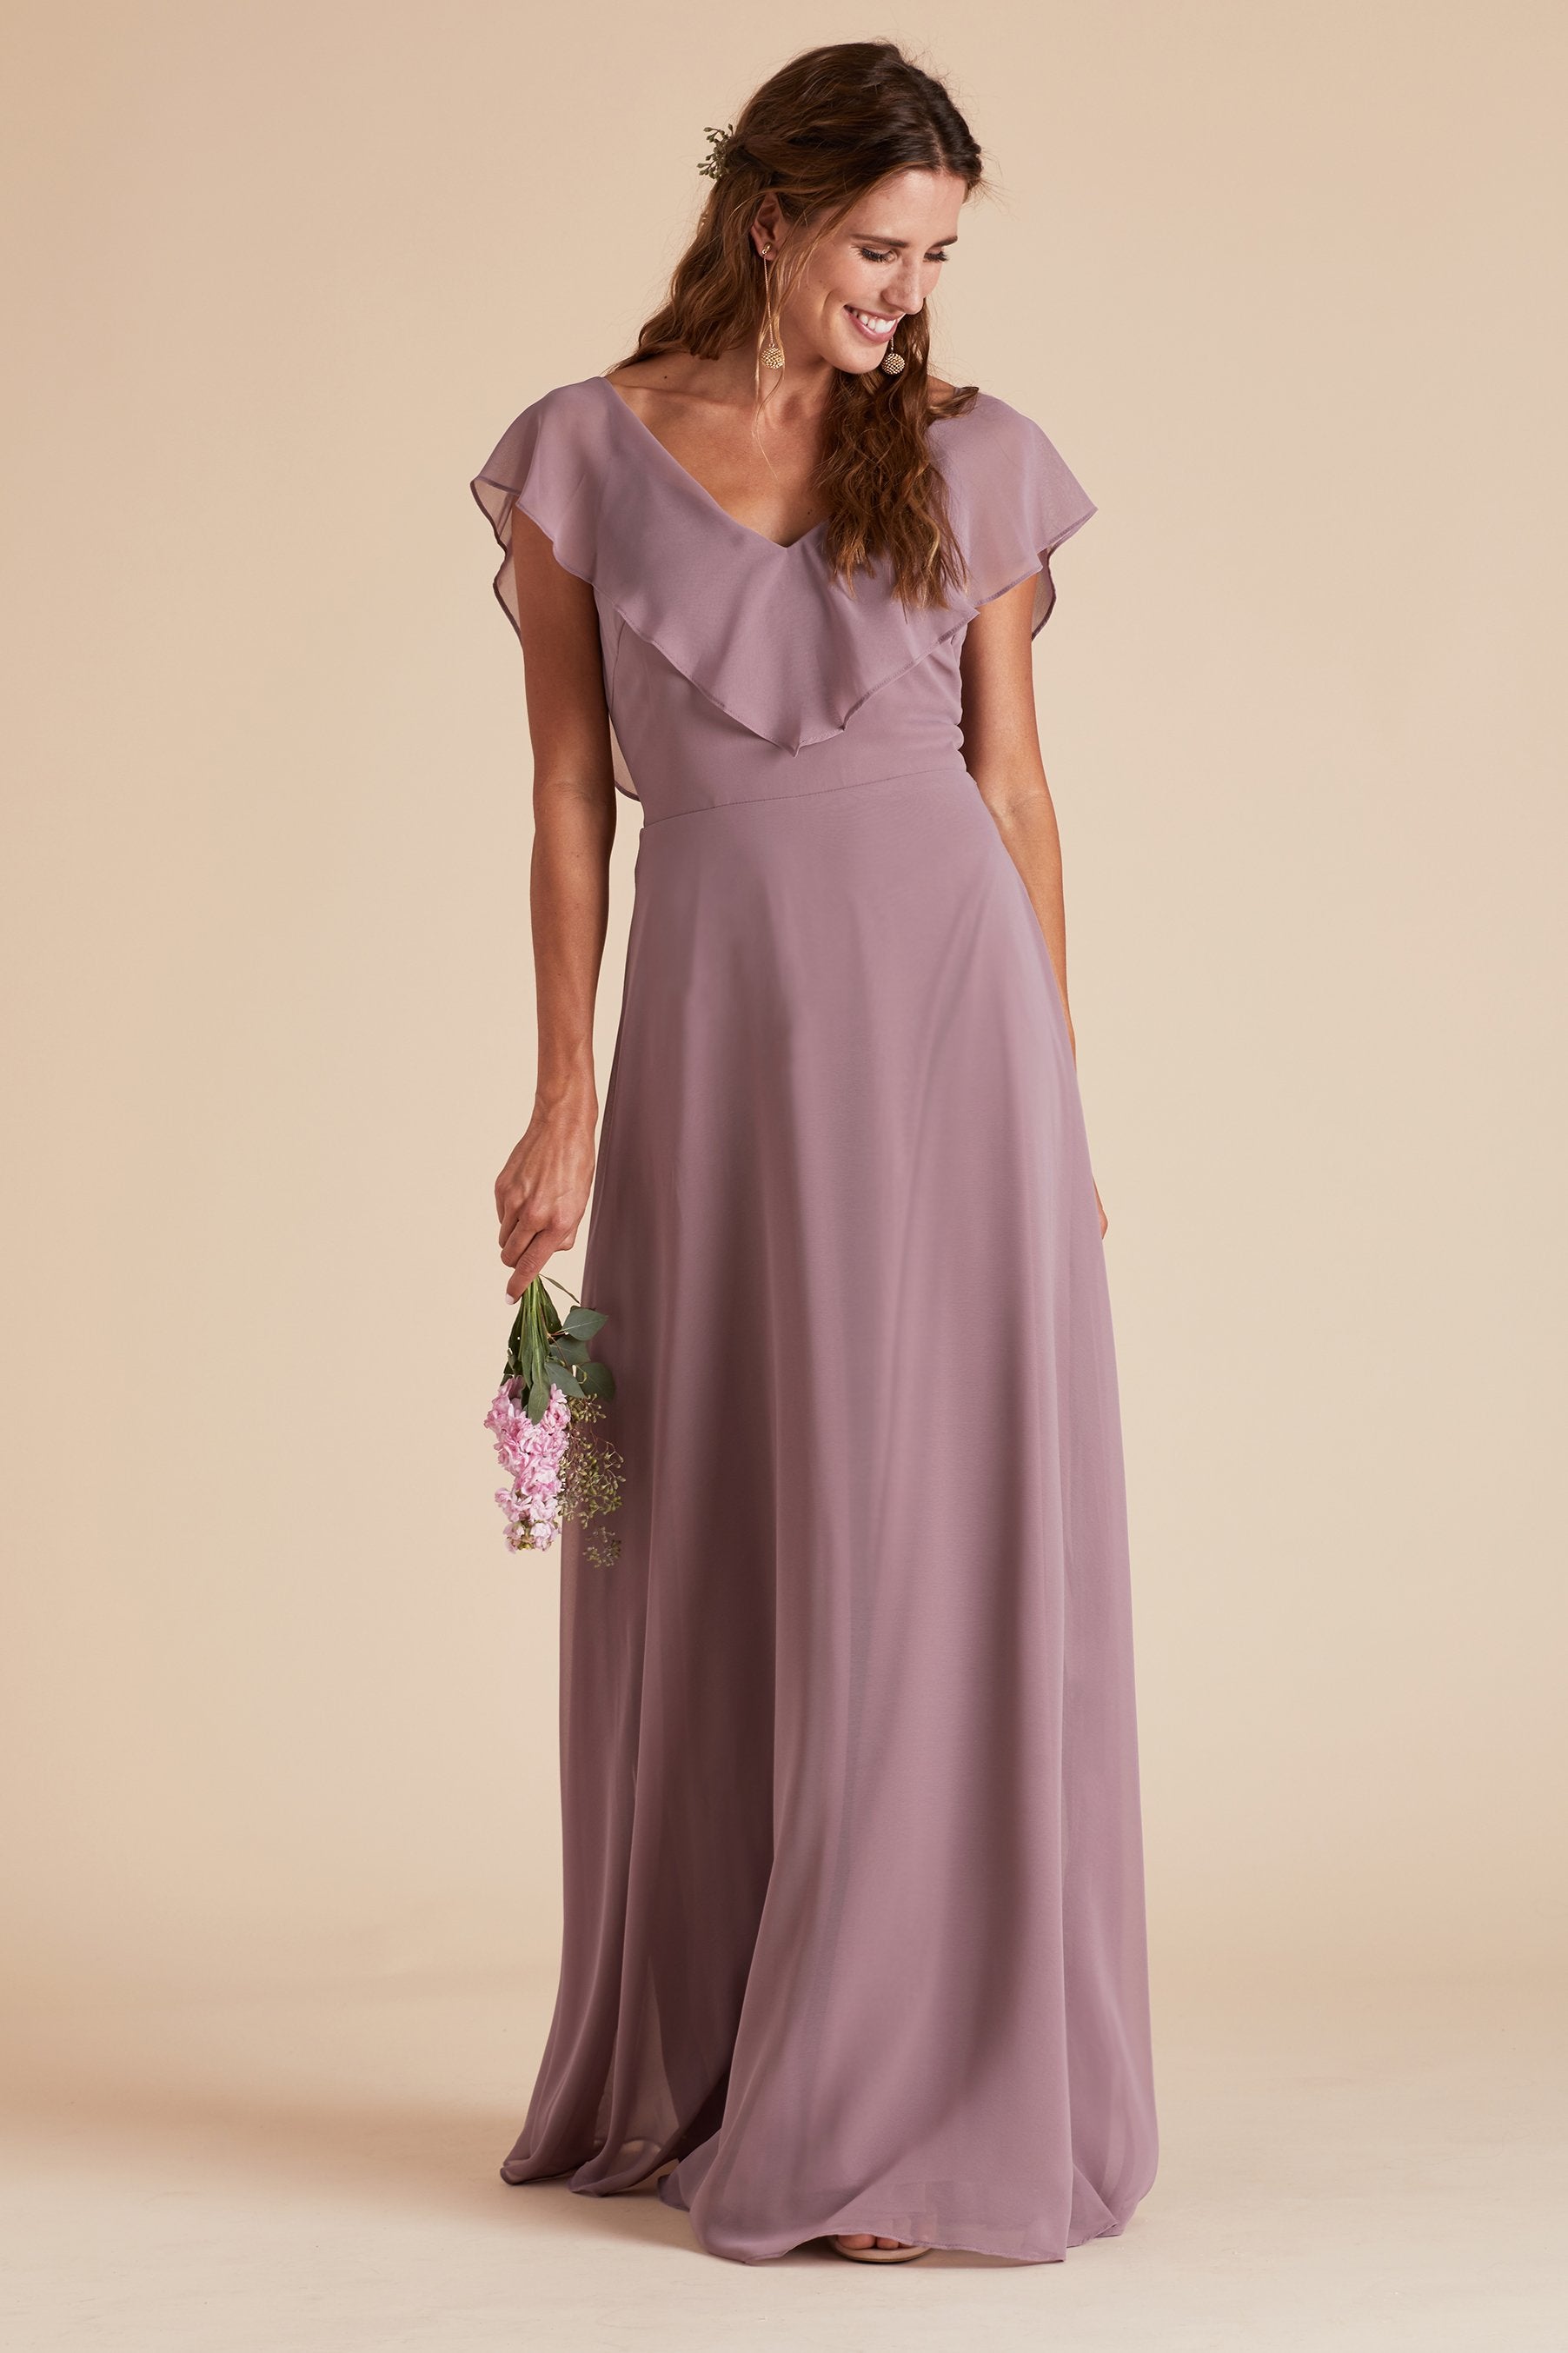 Jane convertible bridesmaid dress in dark mauve chiffon by Birdy Grey, front view